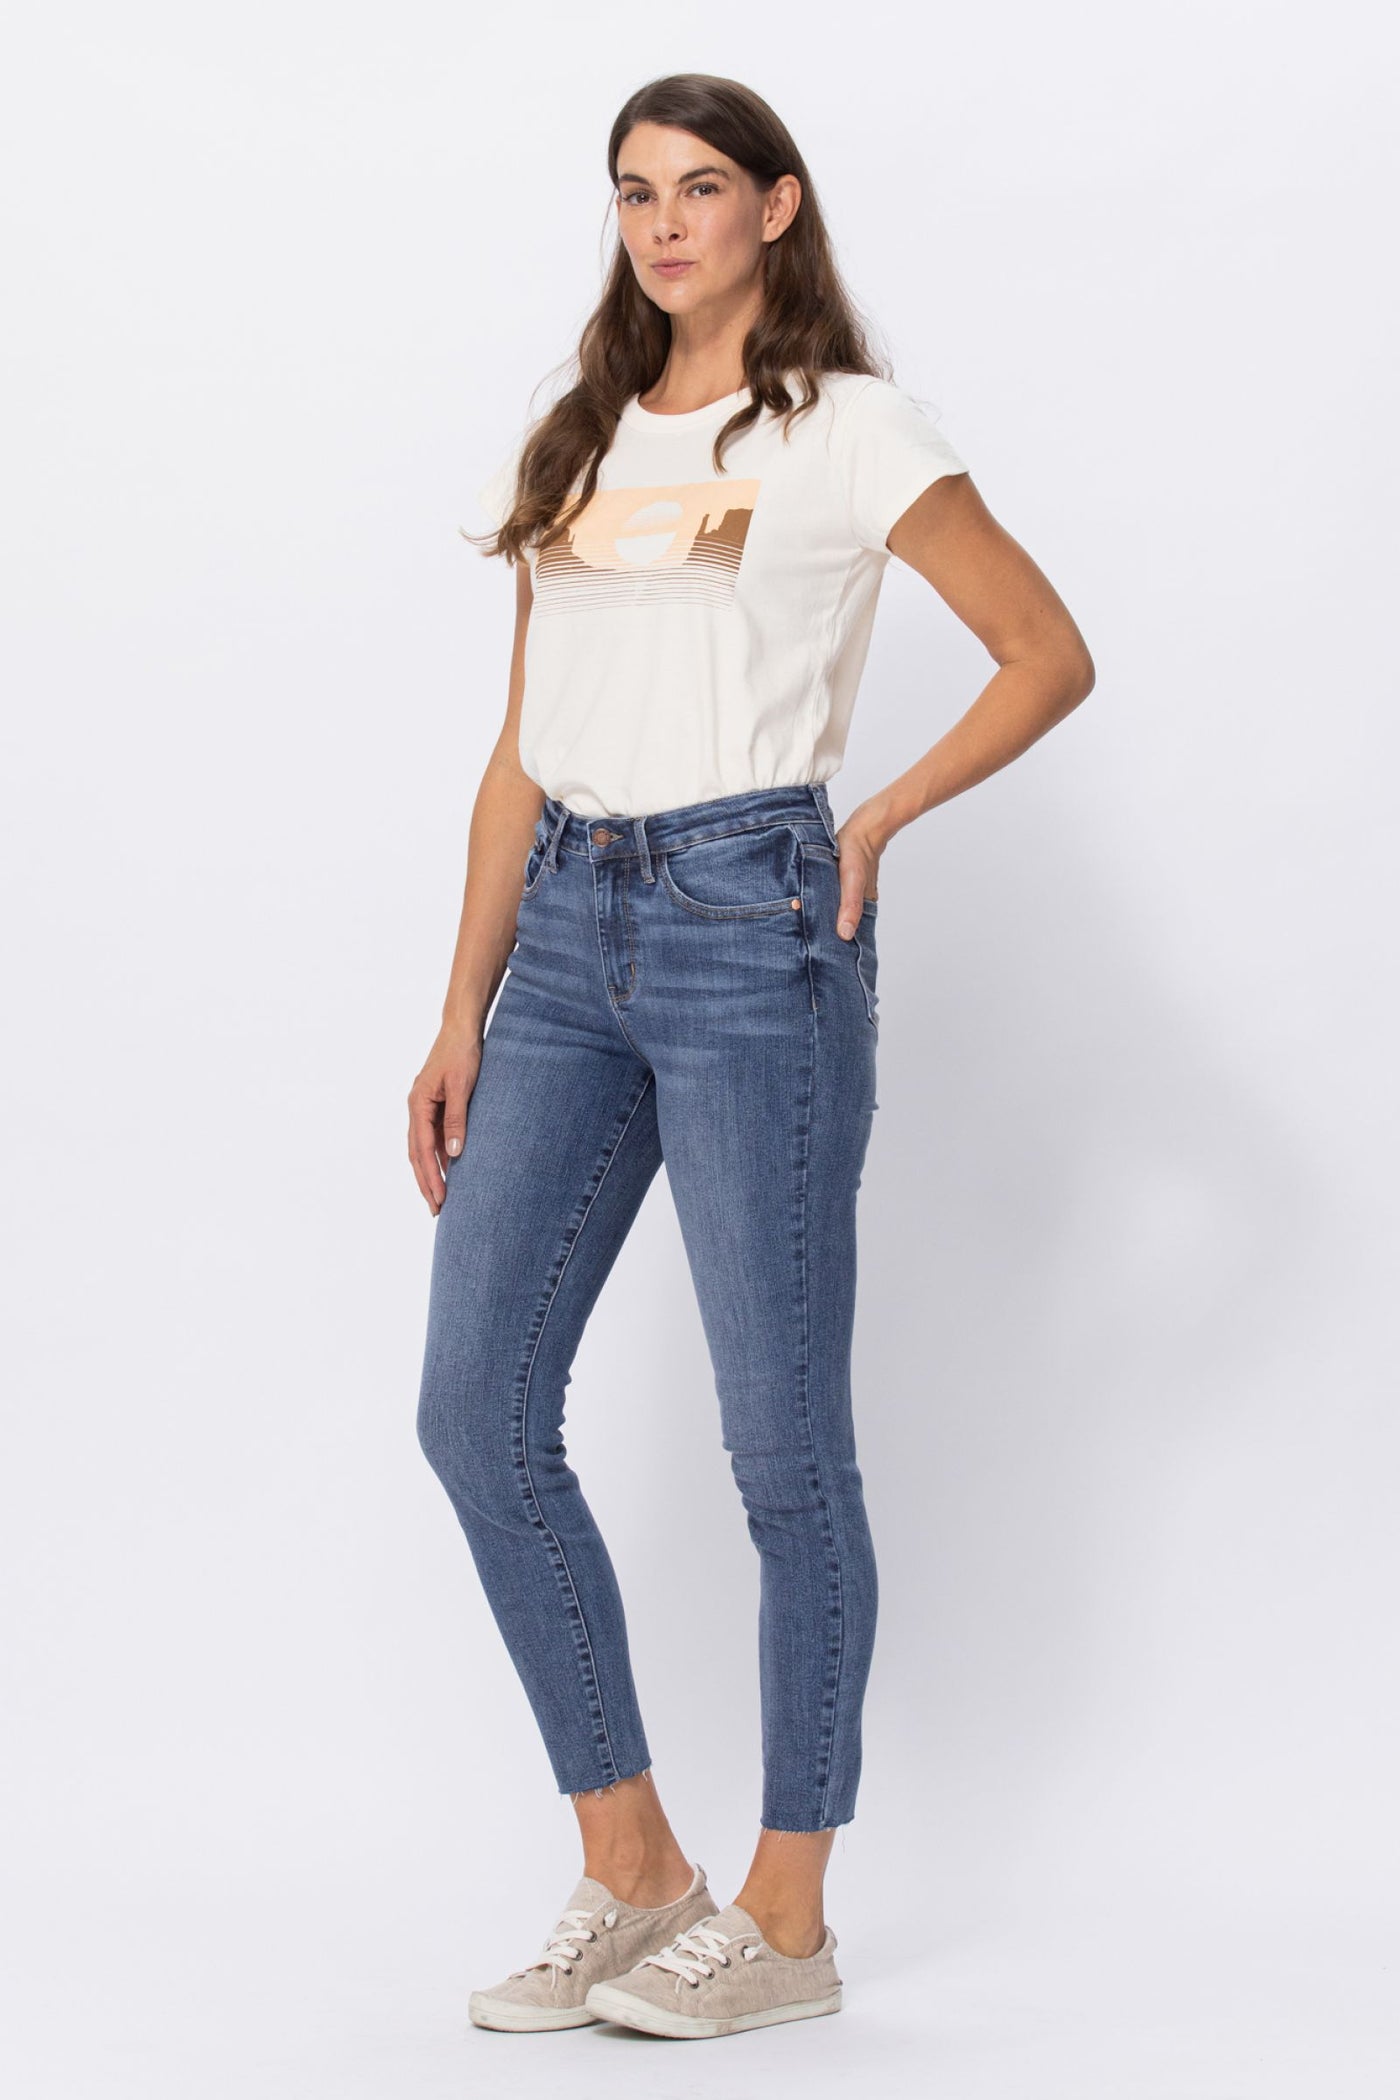 Judy Blue Embroidered Pocket Skinny Jeans